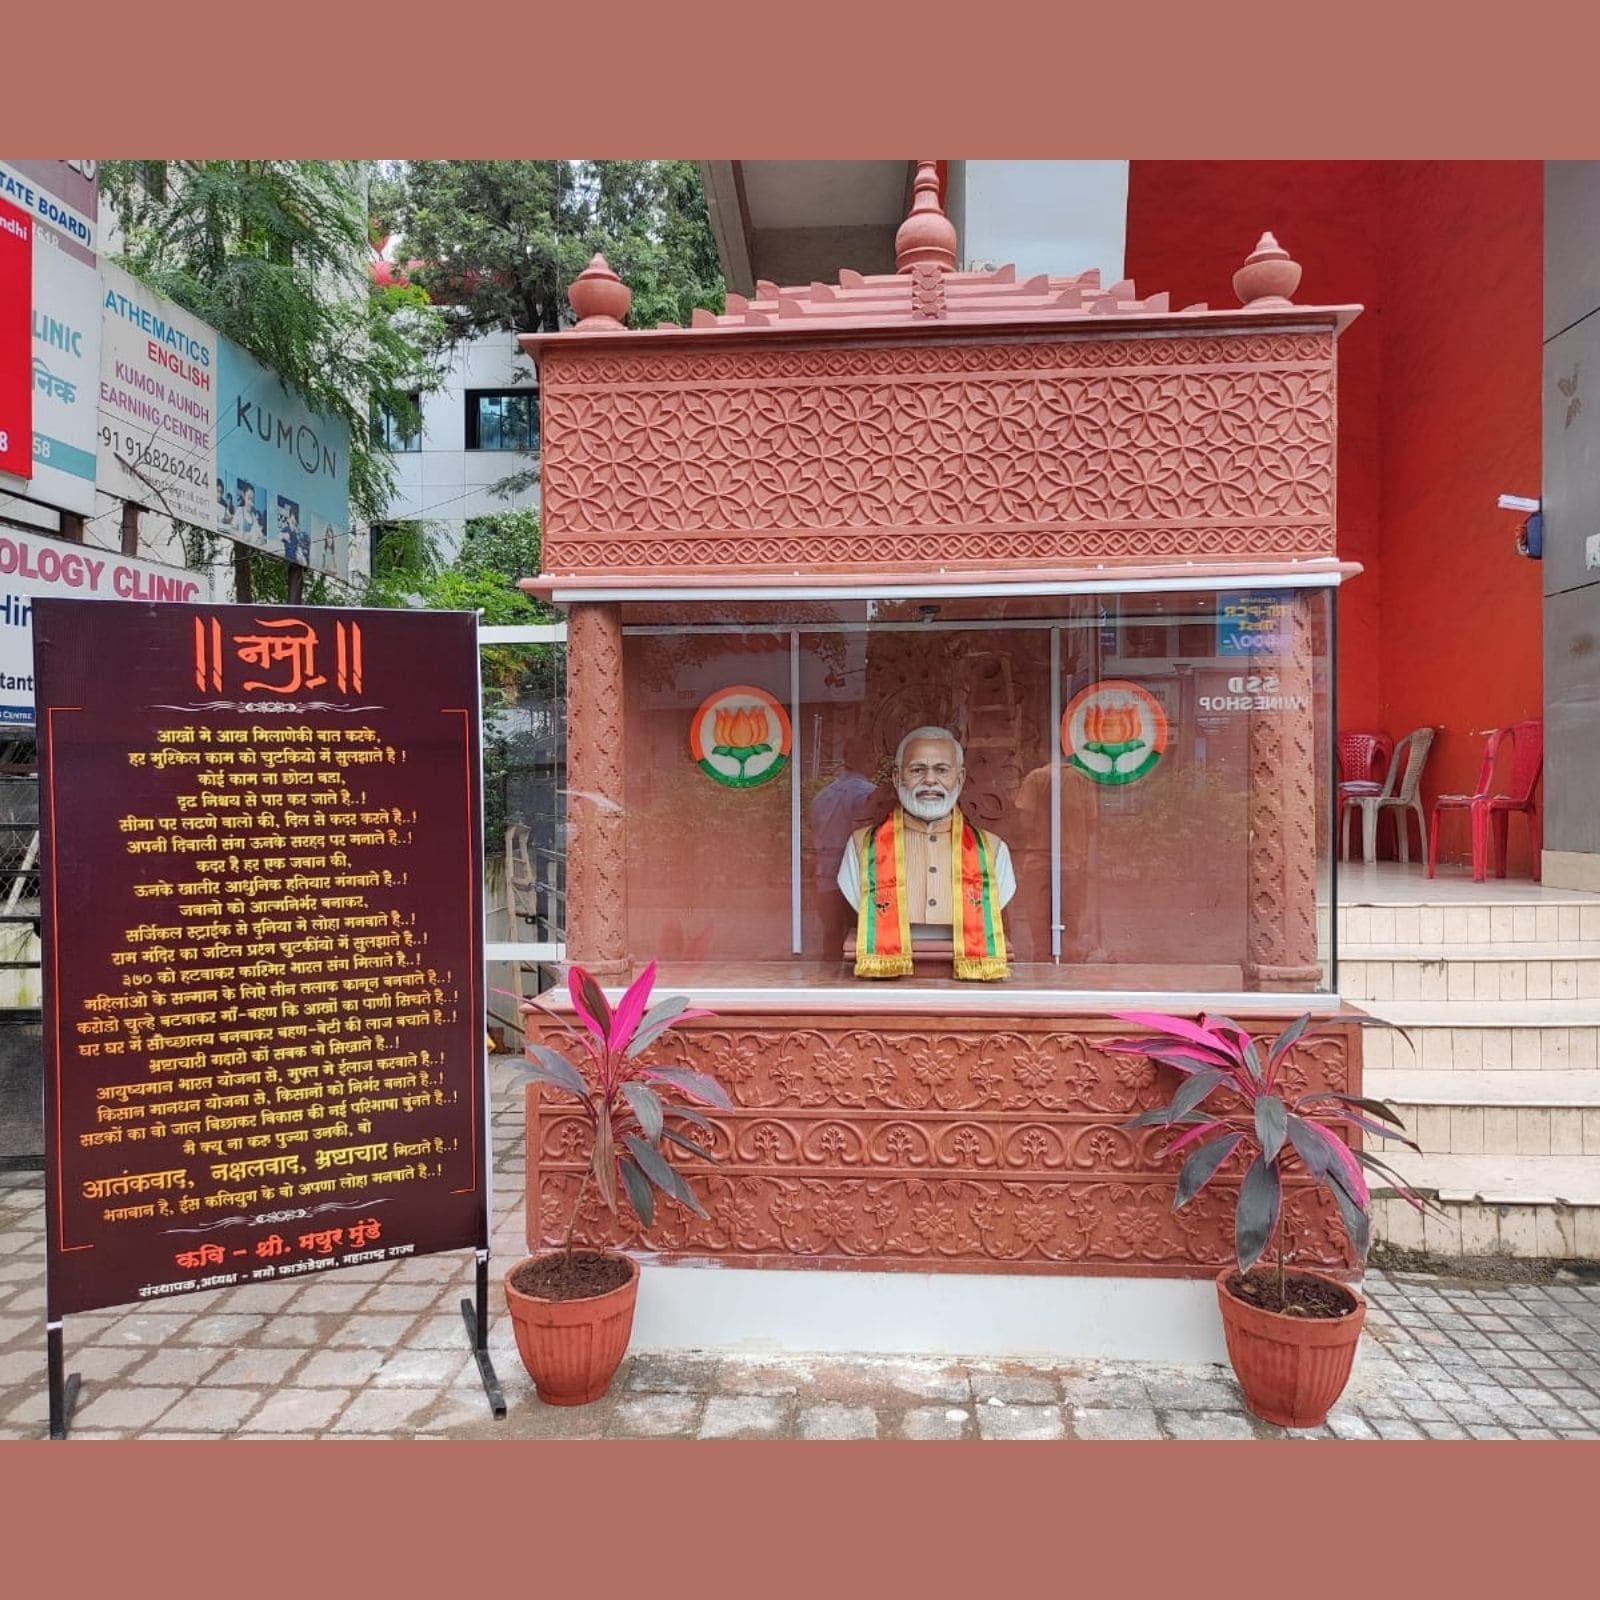 Pune: BJP Worker Builds Temple for Modi Worth Rs 1.6L as Tribute for Building Ram Temple